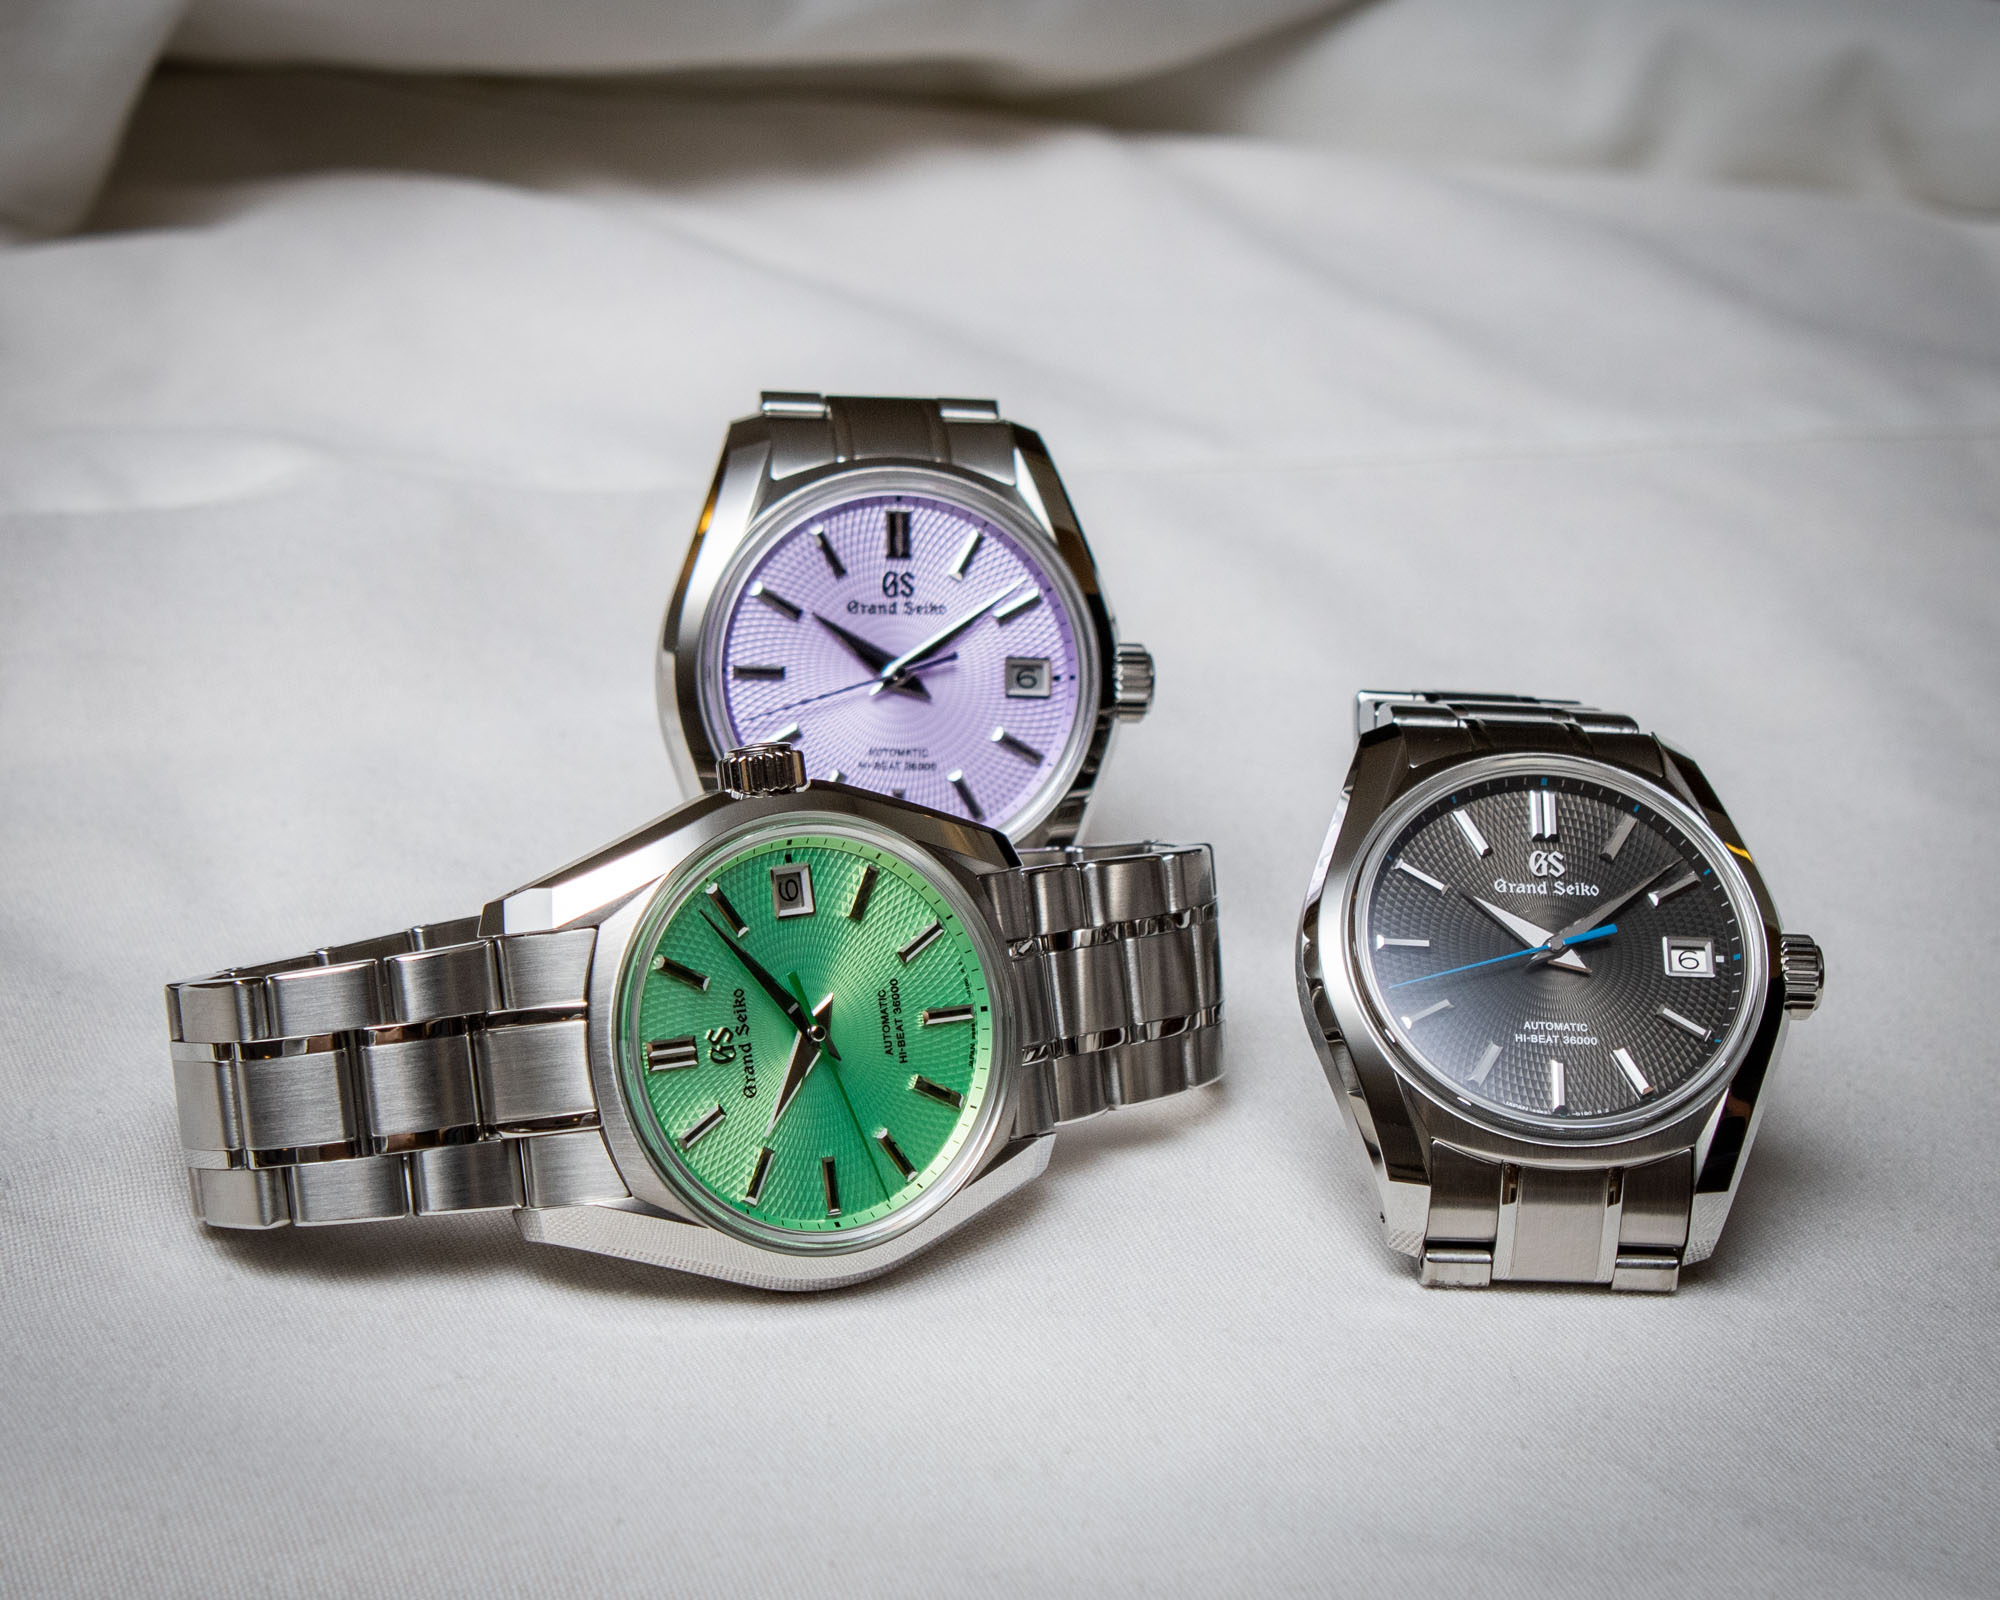 70s Funky Seiko 5 Sports Watches & their Razor Watch Bands | Strapcode